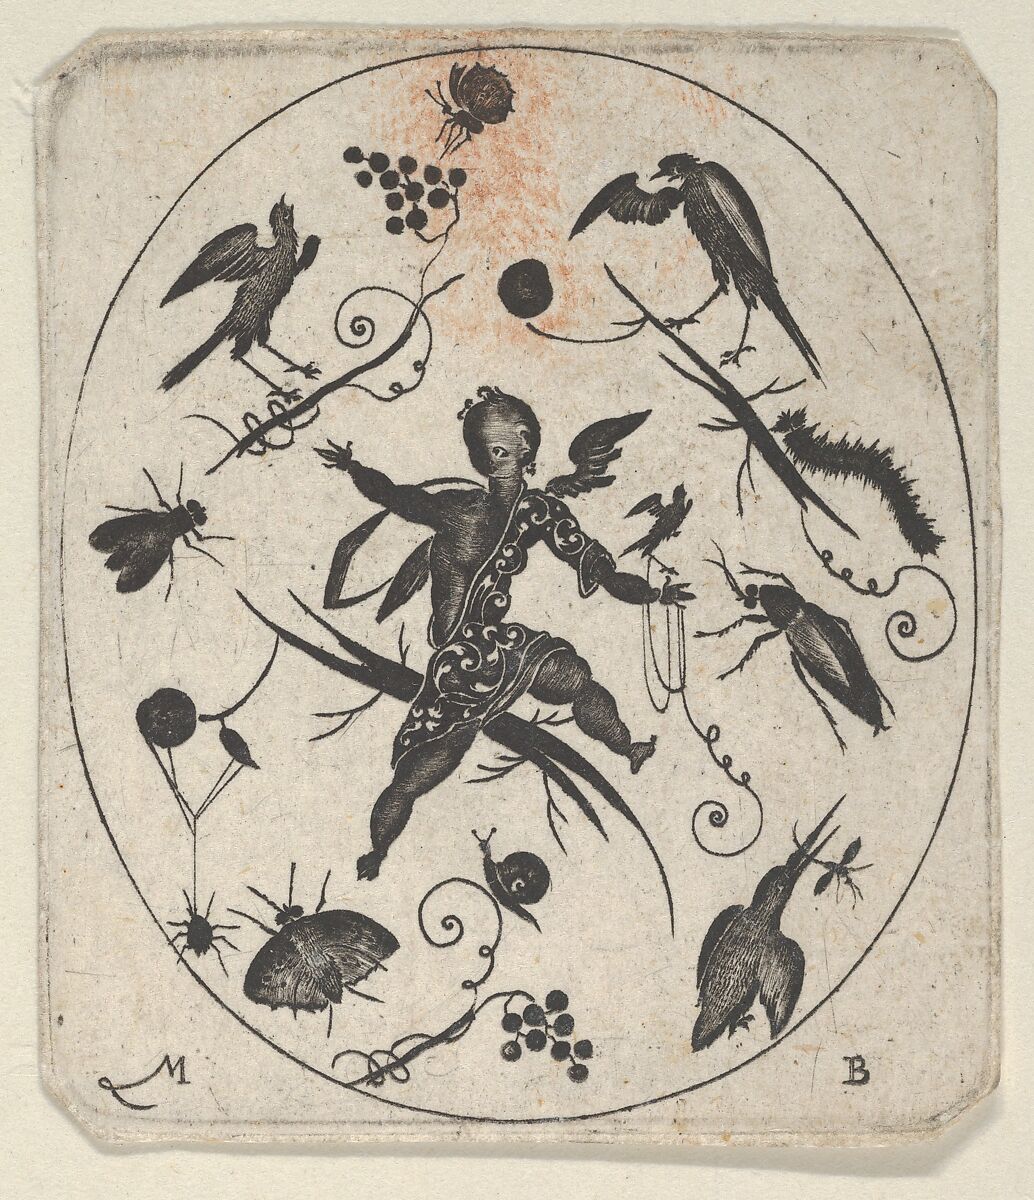 Blackwork Design for Goldsmithwork with a Putto, Birds and Insects, Mathais Beitler (German, Ansbach, active ca. 1582–1616), Engraving and blackwork 